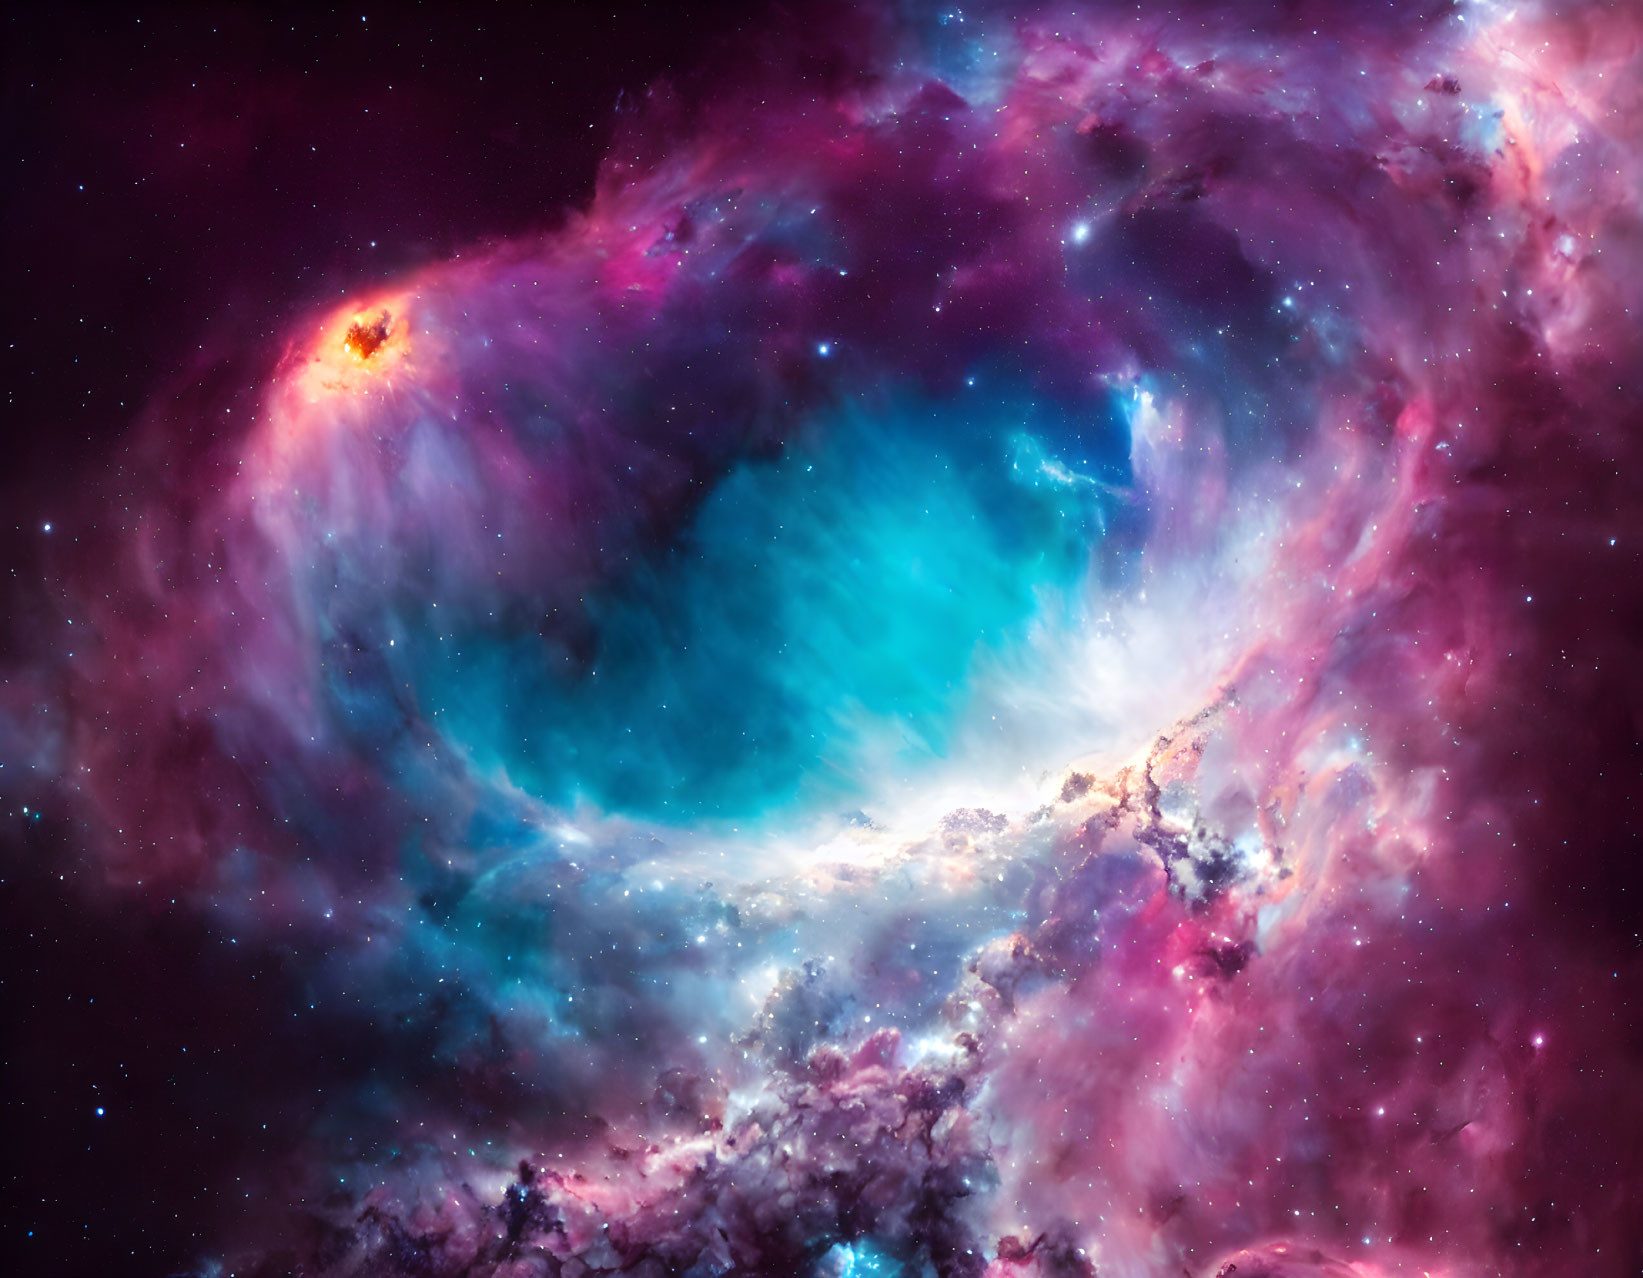 Colorful swirling nebula with stars in purple, blue, and pink hues